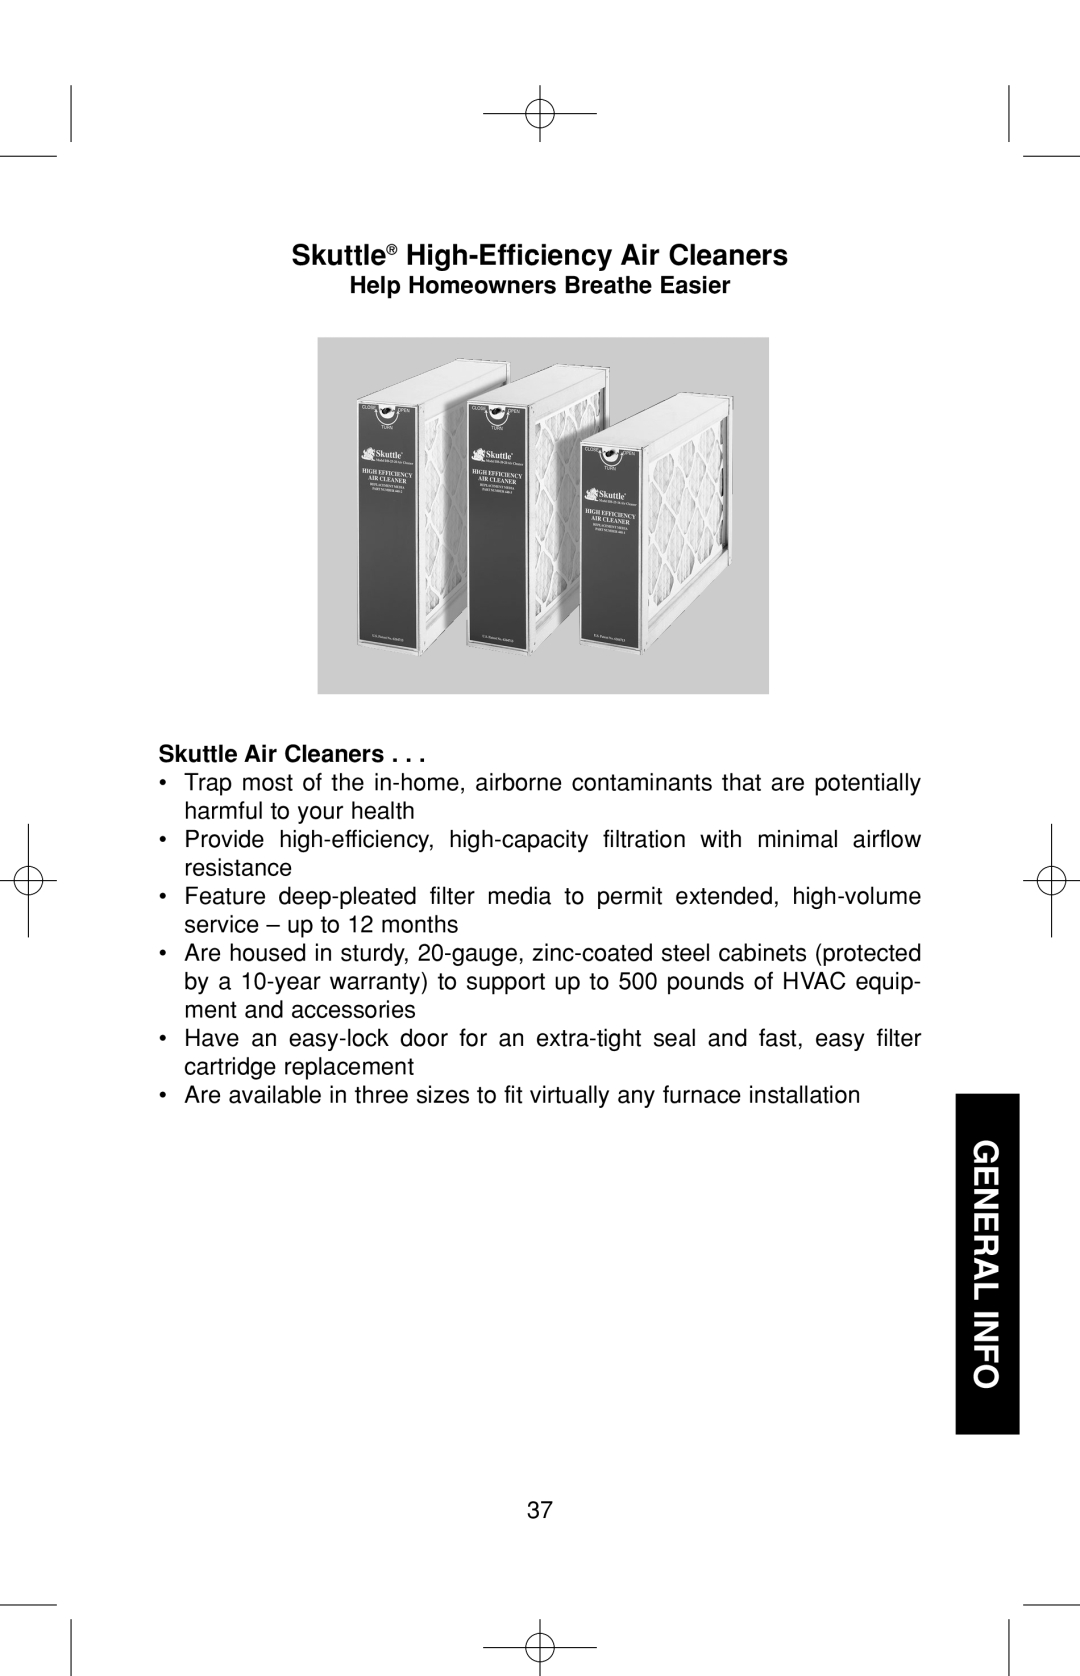 Skuttle Indoor Air Quality Products 60-2, F60-2 Skuttle High-EfficiencyAir Cleaners, General Info, Skuttle Air Cleaners 